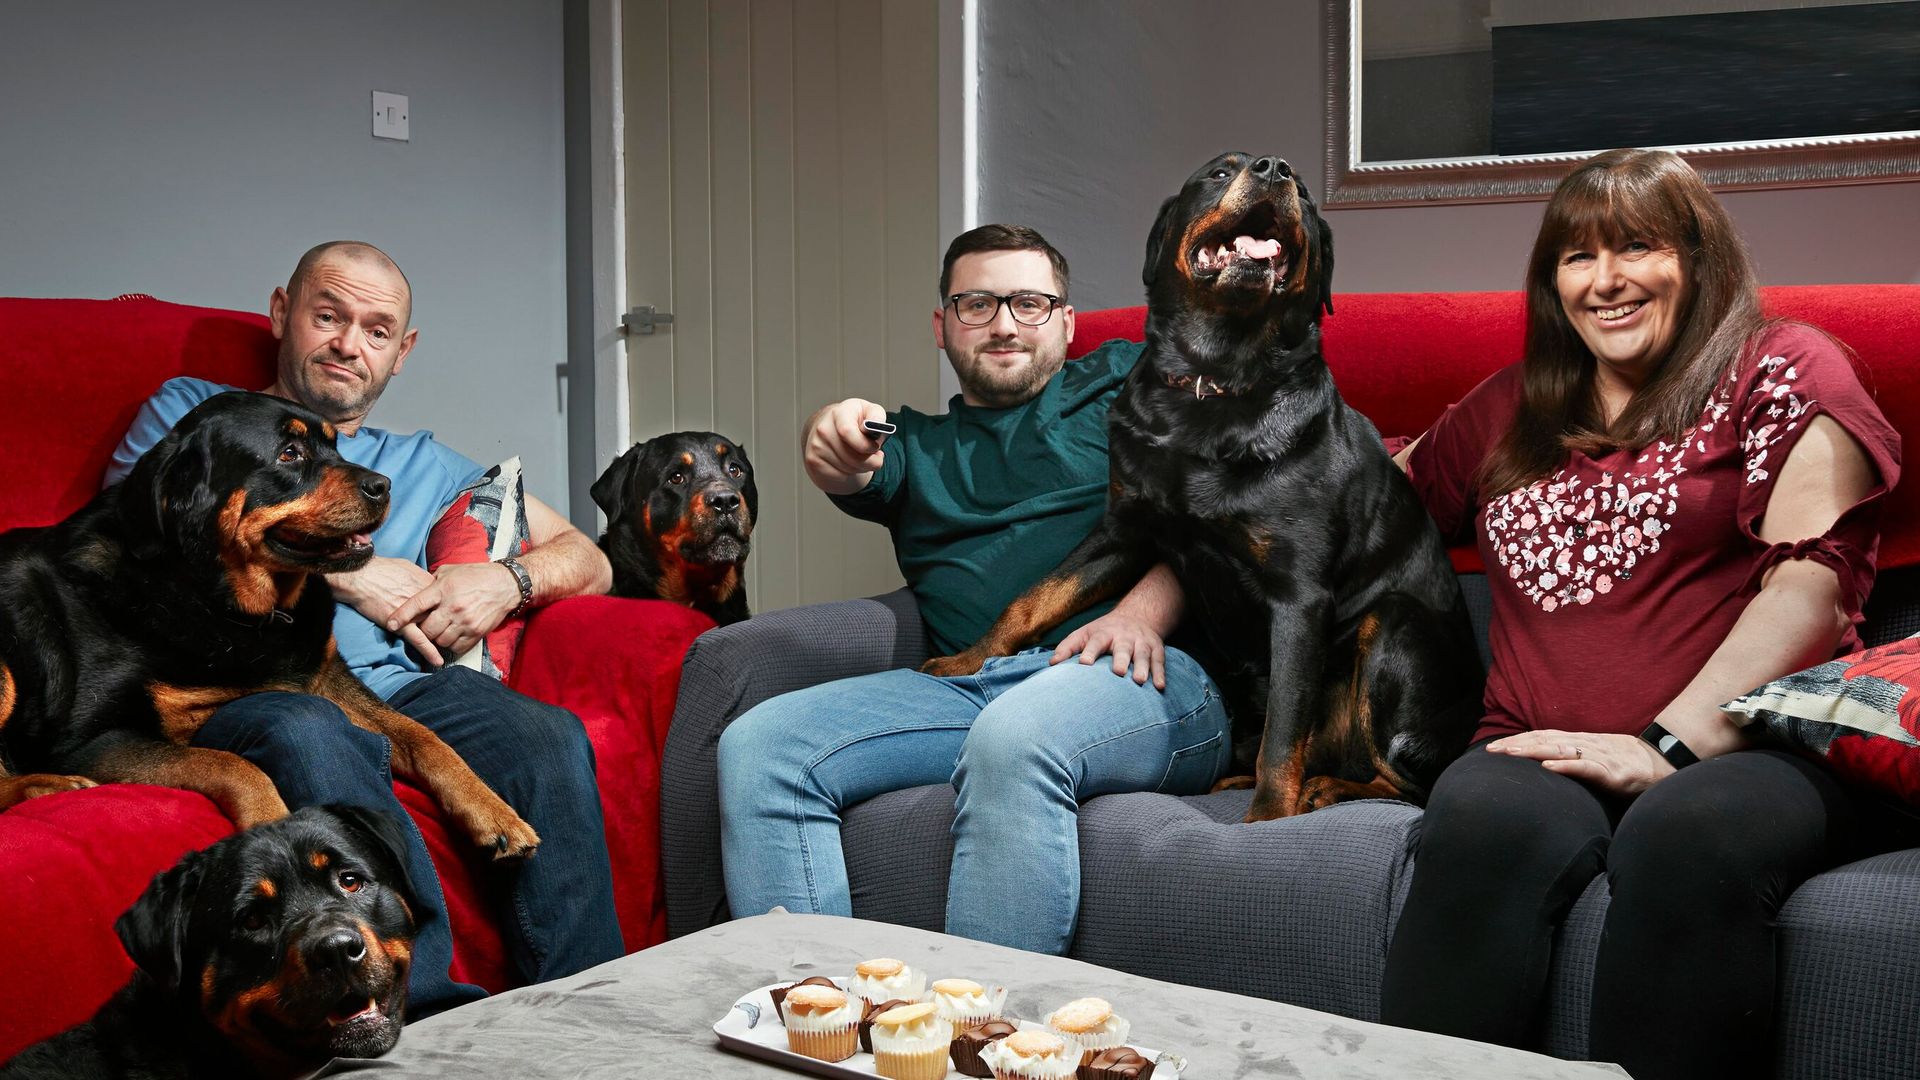 The Malones are a fan favourite family on Gogglebox